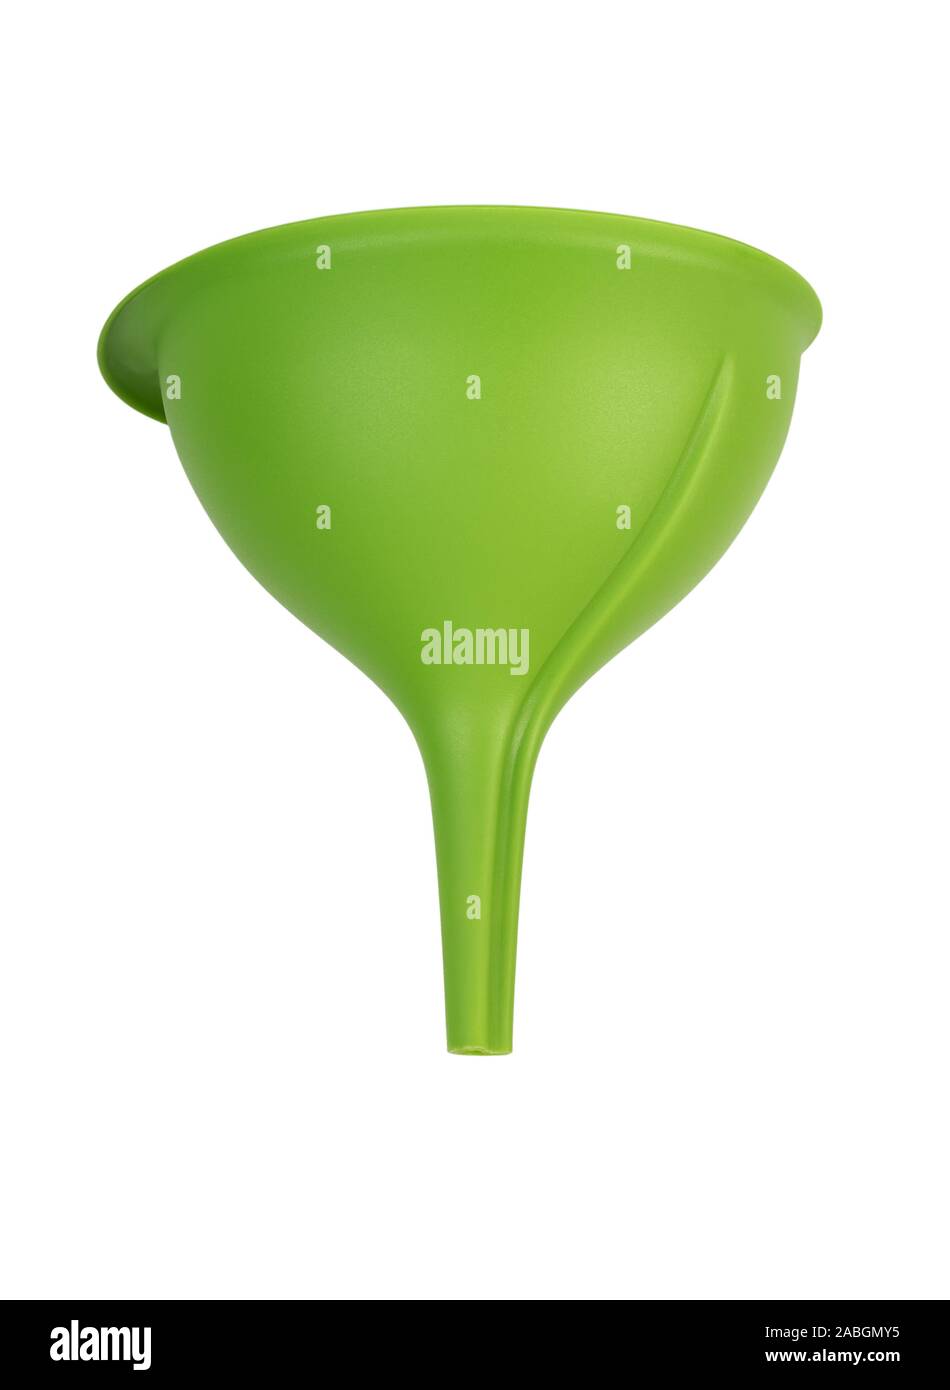 Green plastic kitchen funnel isolated on white background Stock Photo